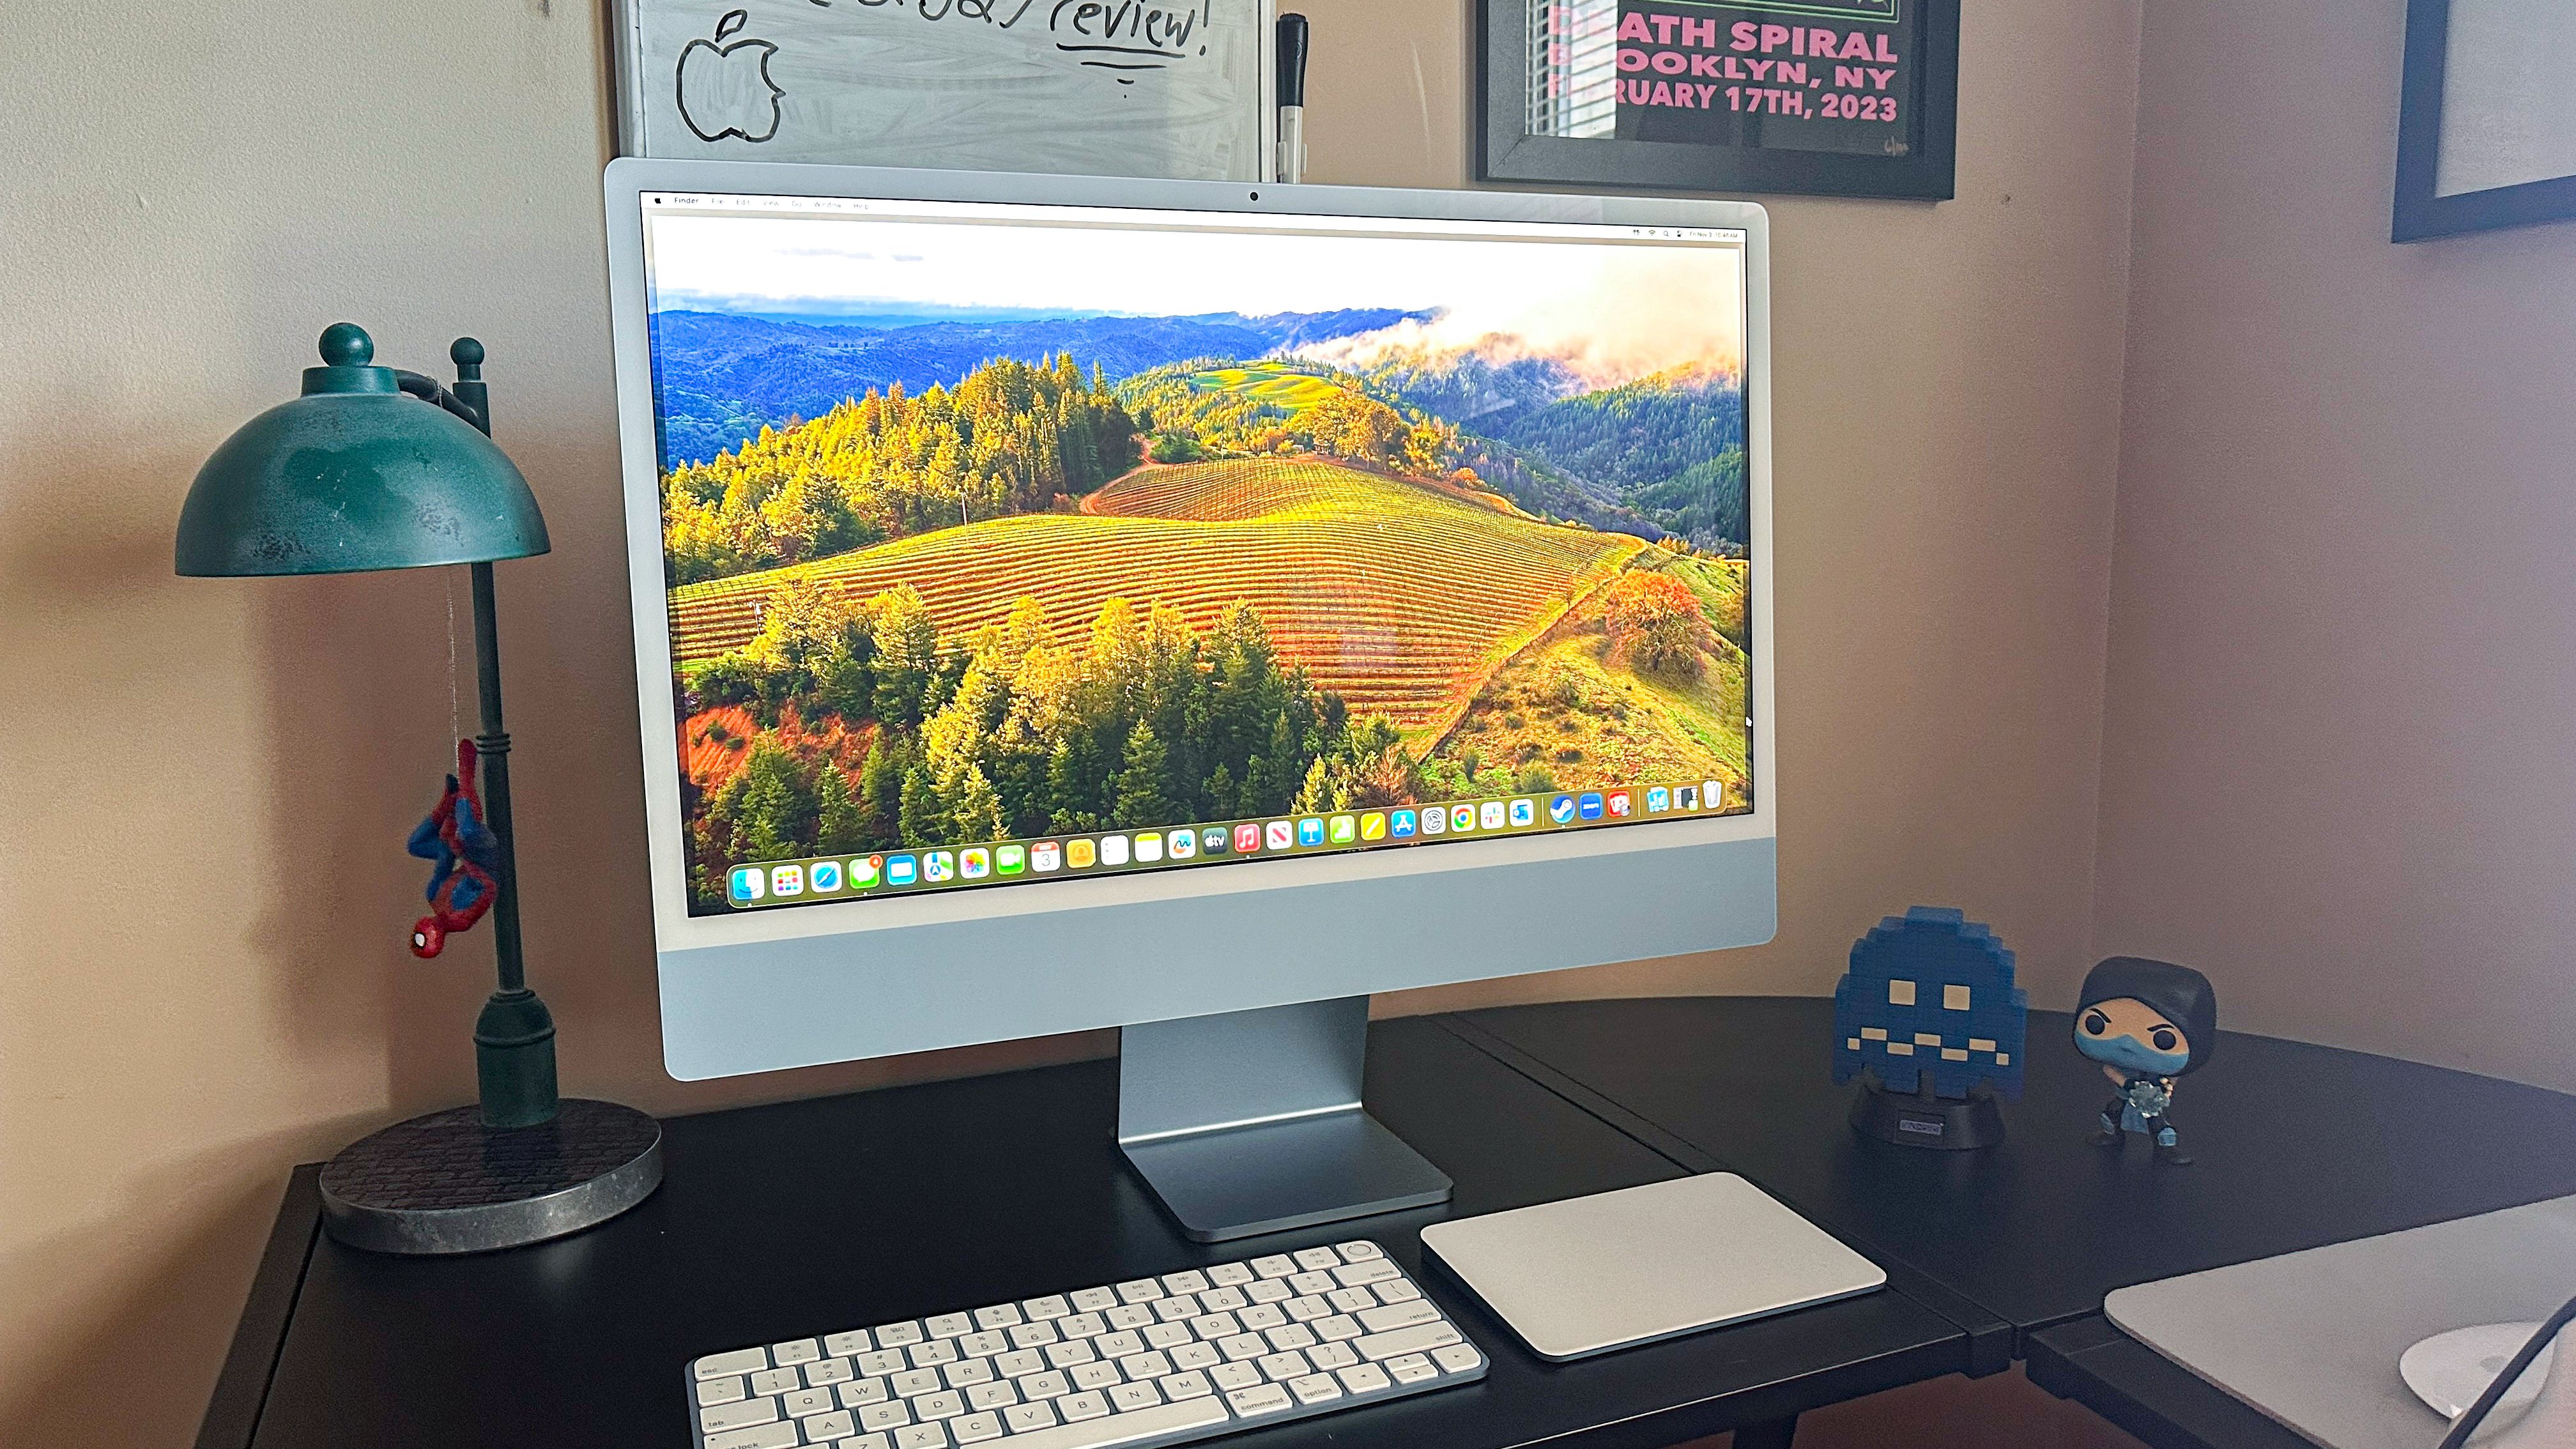 Apple iMac M3 review: - The Verge